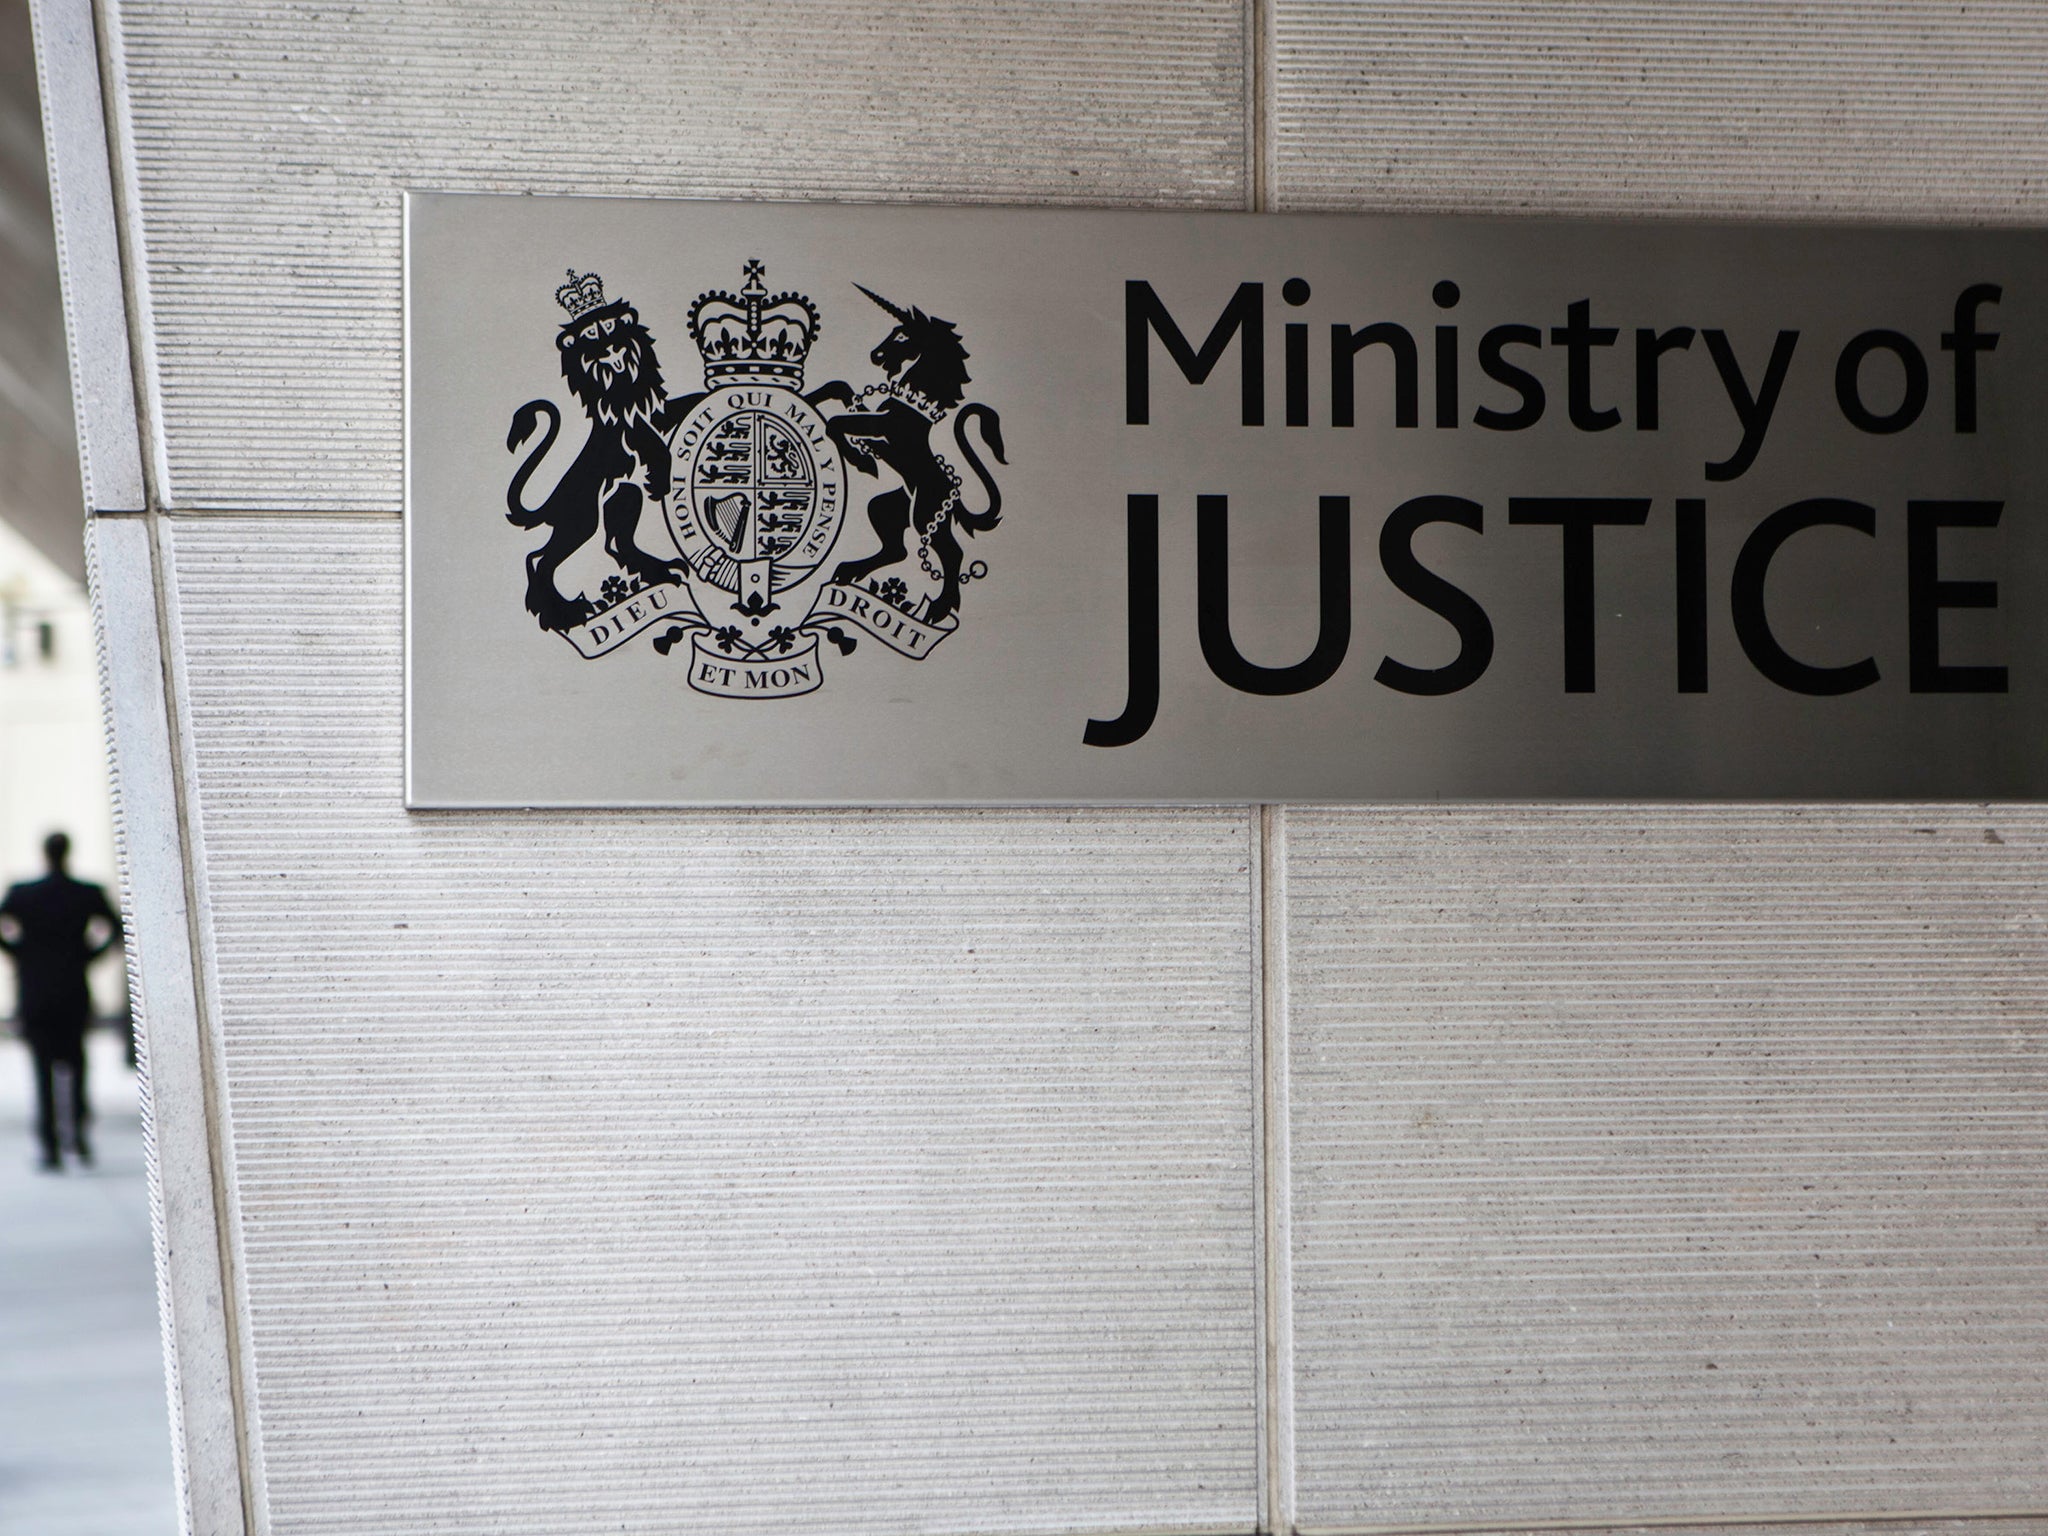 Figures obtained by Freedom of Information from the Ministry of Justice show that overall fraud prosecutions fell